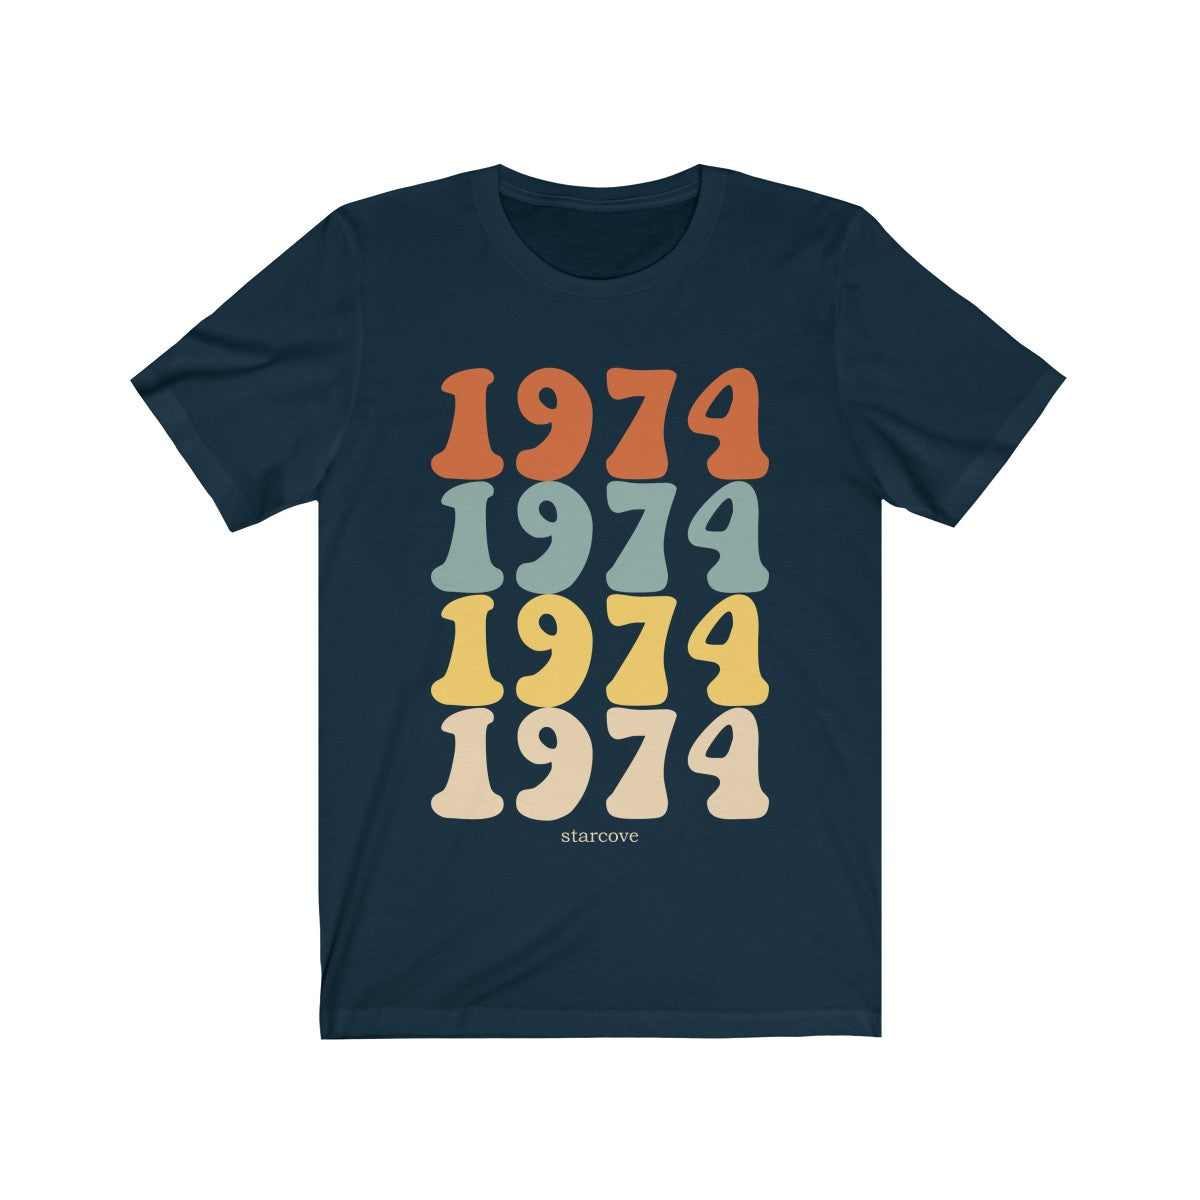 1974 shirt, 47th Birthday Party Turning 47 Years Old, 70s Retro Vintage gift Idea Women Men, Born Made in 1974 Funny Present Dad Mom TShirt Starcove Fashion